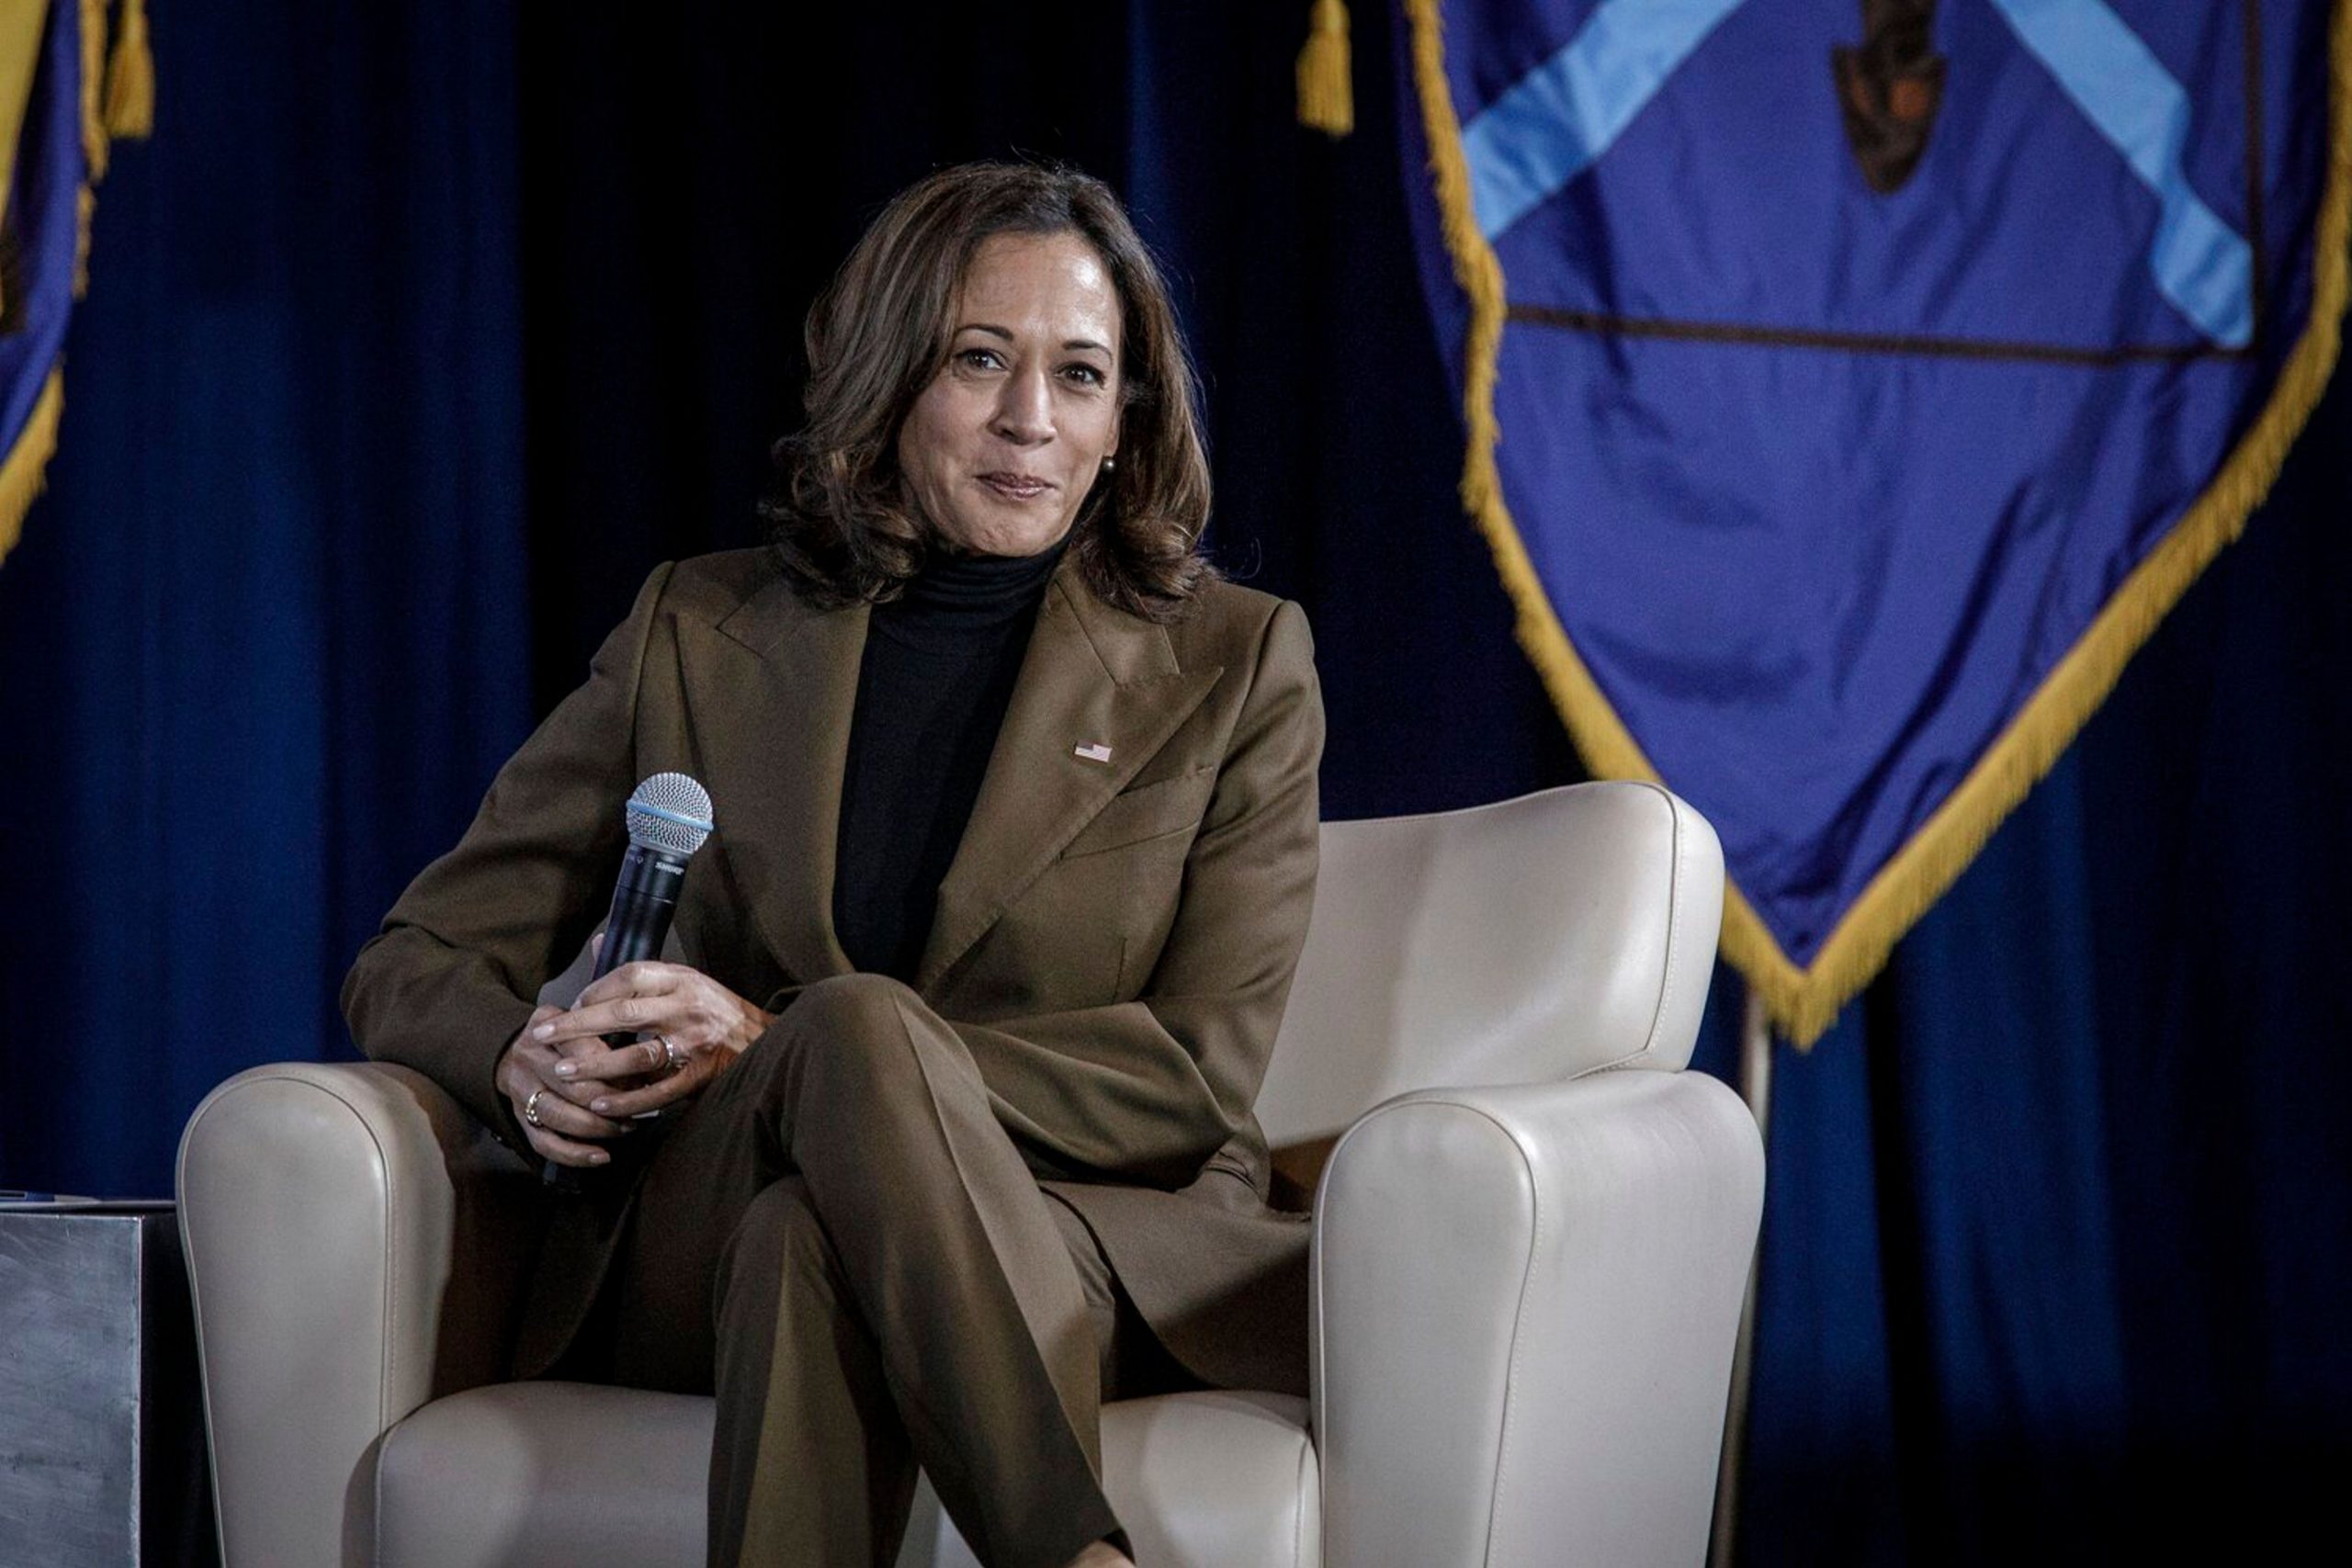 Kamala Harris involved in minor car accident earlier this week: US Secret Service